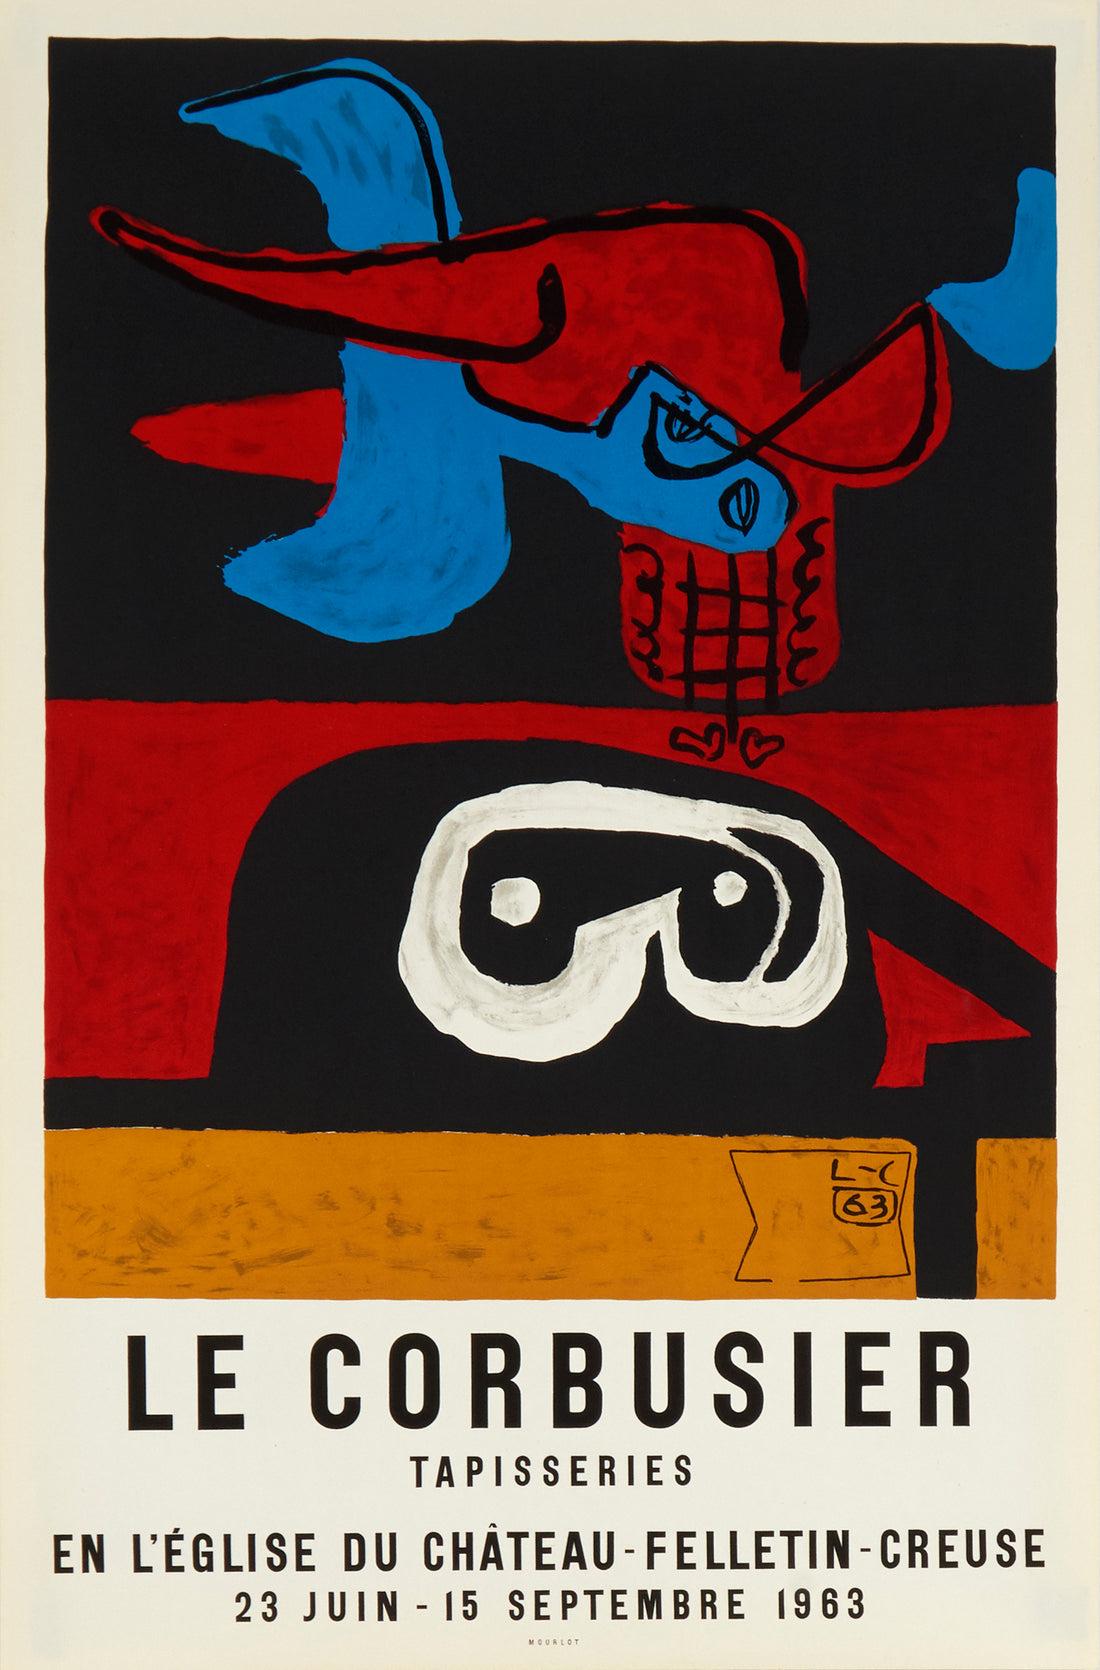 Artist: Le Corbusier

Medium: Lithographic Poster, 1963

Dimensions: 29.5 x 19.25 in, 74.9 x 48.9 cm

Classic Poster Paper - Perfect Condition A+

This rich and beautiful lithographic poster was created for an exhibition of famous Swiss architect Le